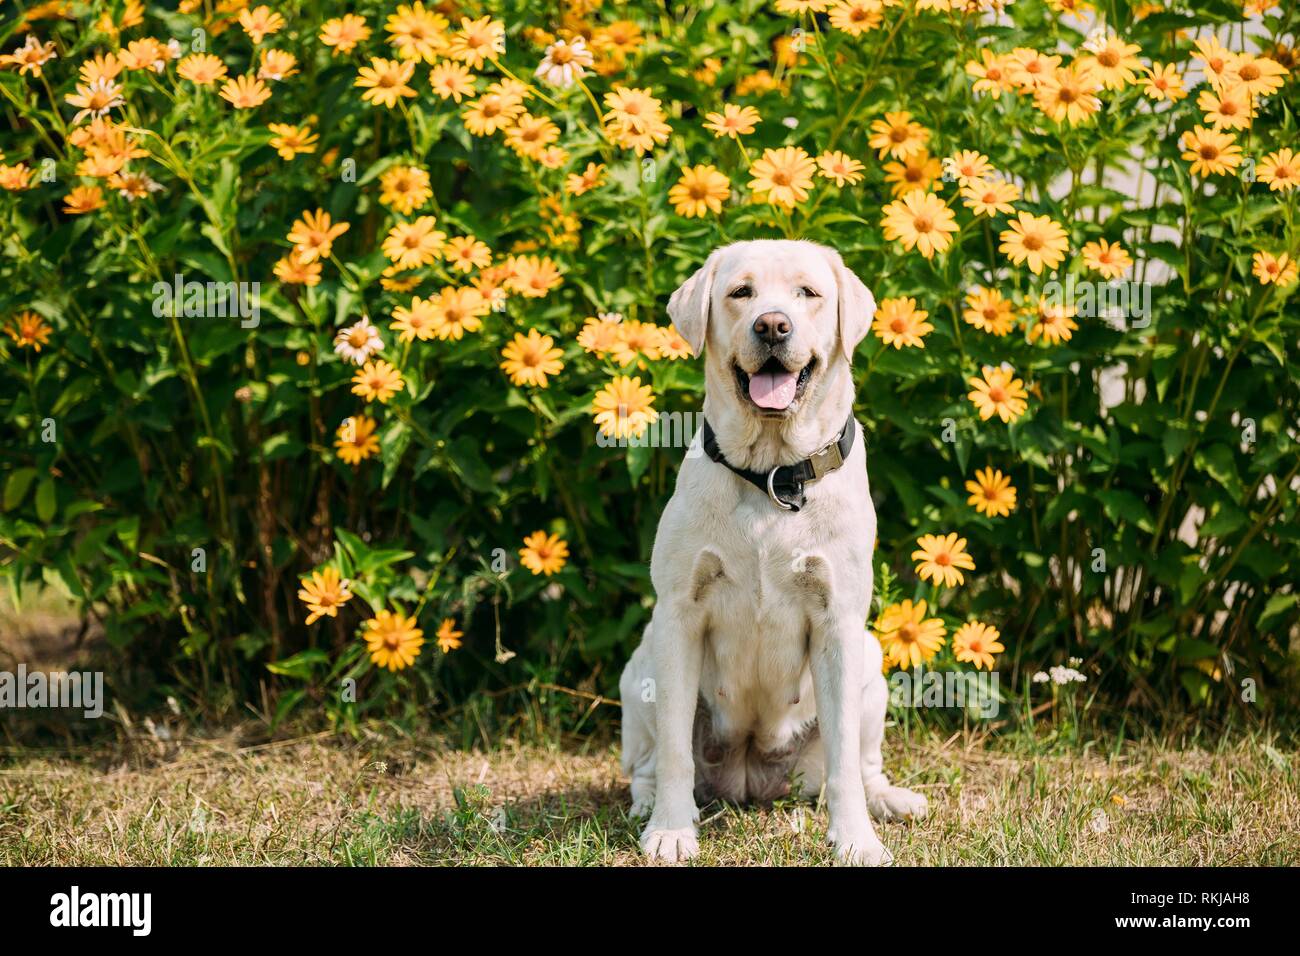 Smiling With Tongue, Staring Eyes Yellow Golden Labrador Adult Female Dog Sitting Posing On The Trimmed Lawn Of Garden. The Bright Yellow Flowers Stock Photo